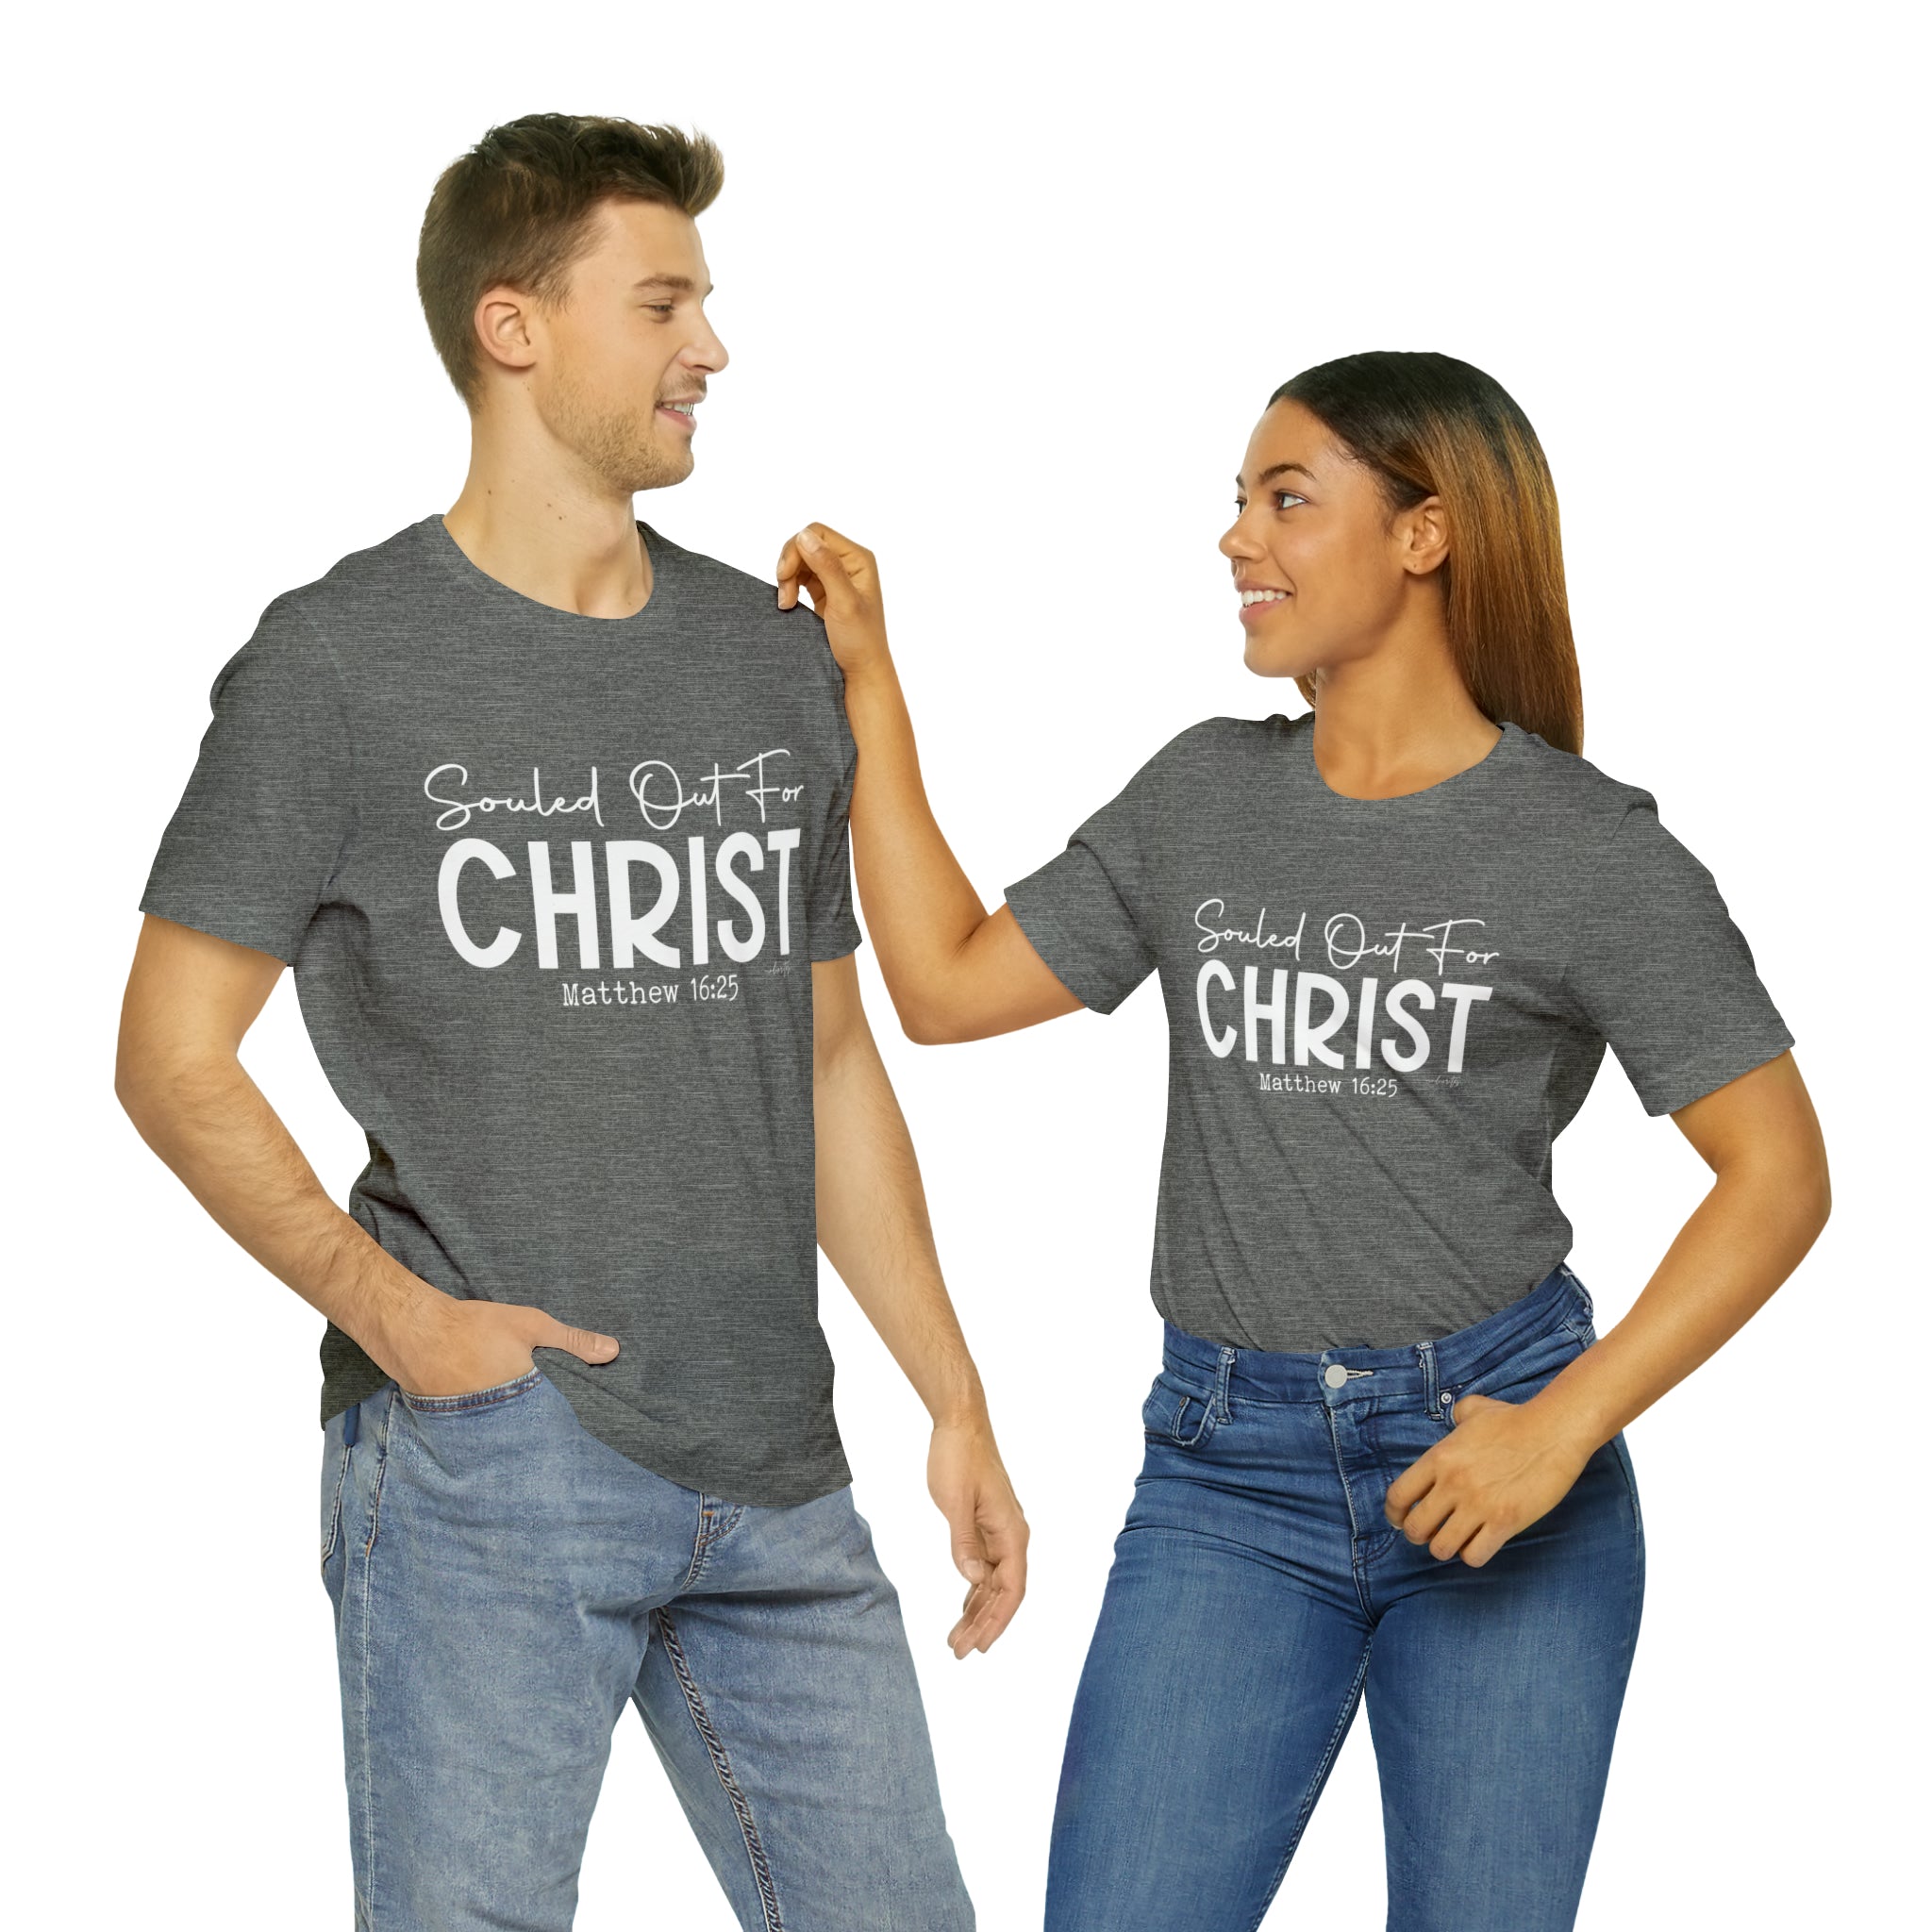 Souled Out for Christ Tee